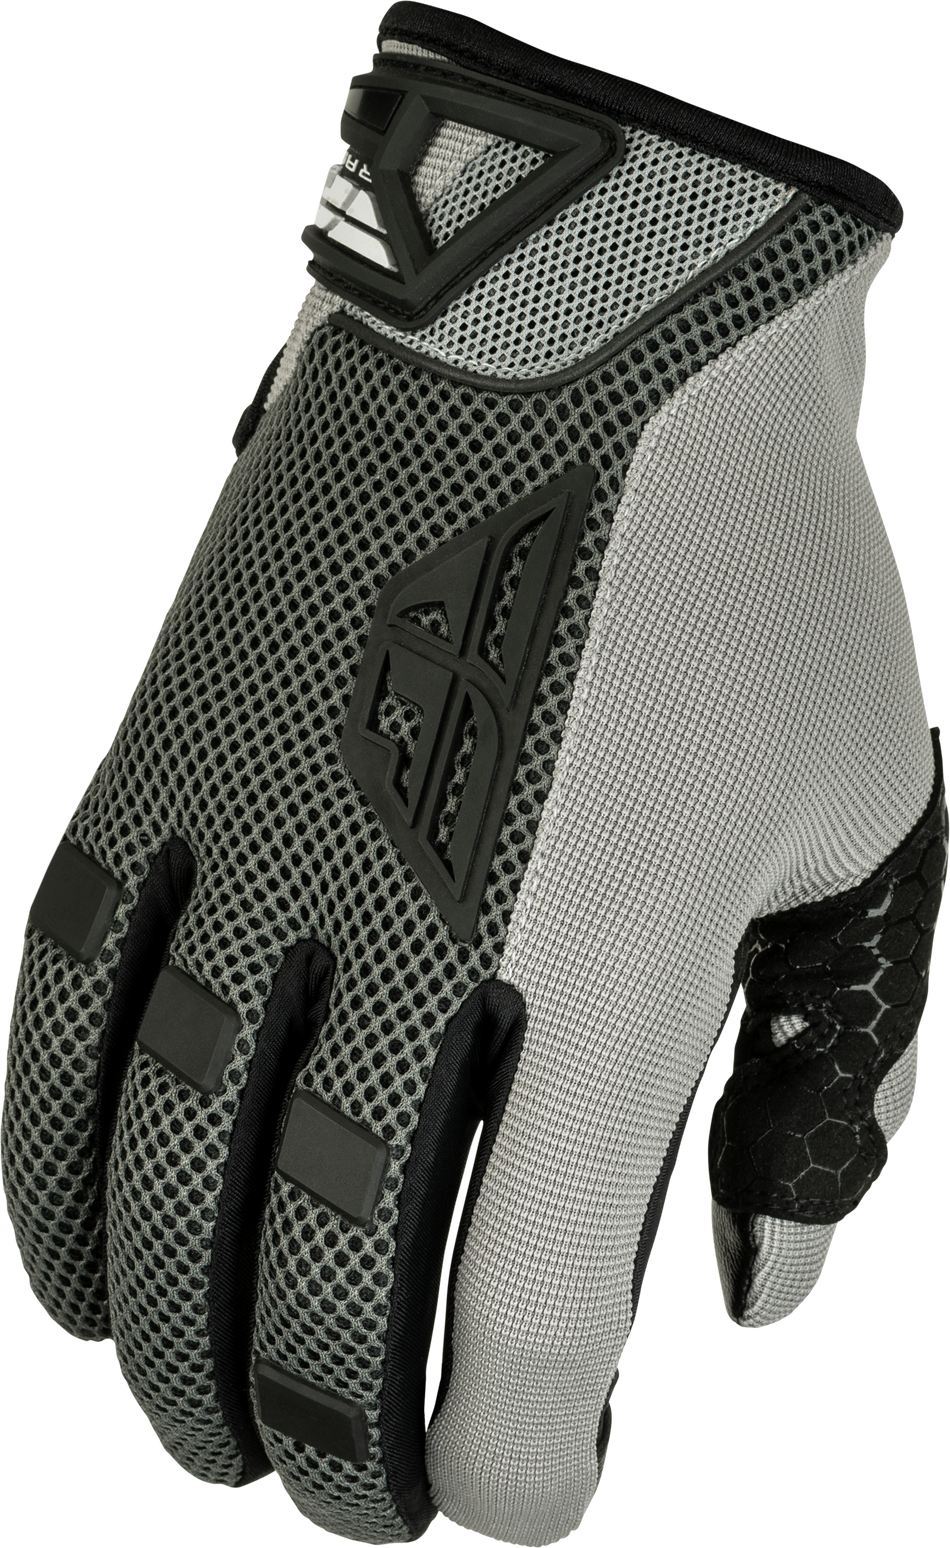 FLY RACING Coolpro Gloves Grey Md 476-4025M